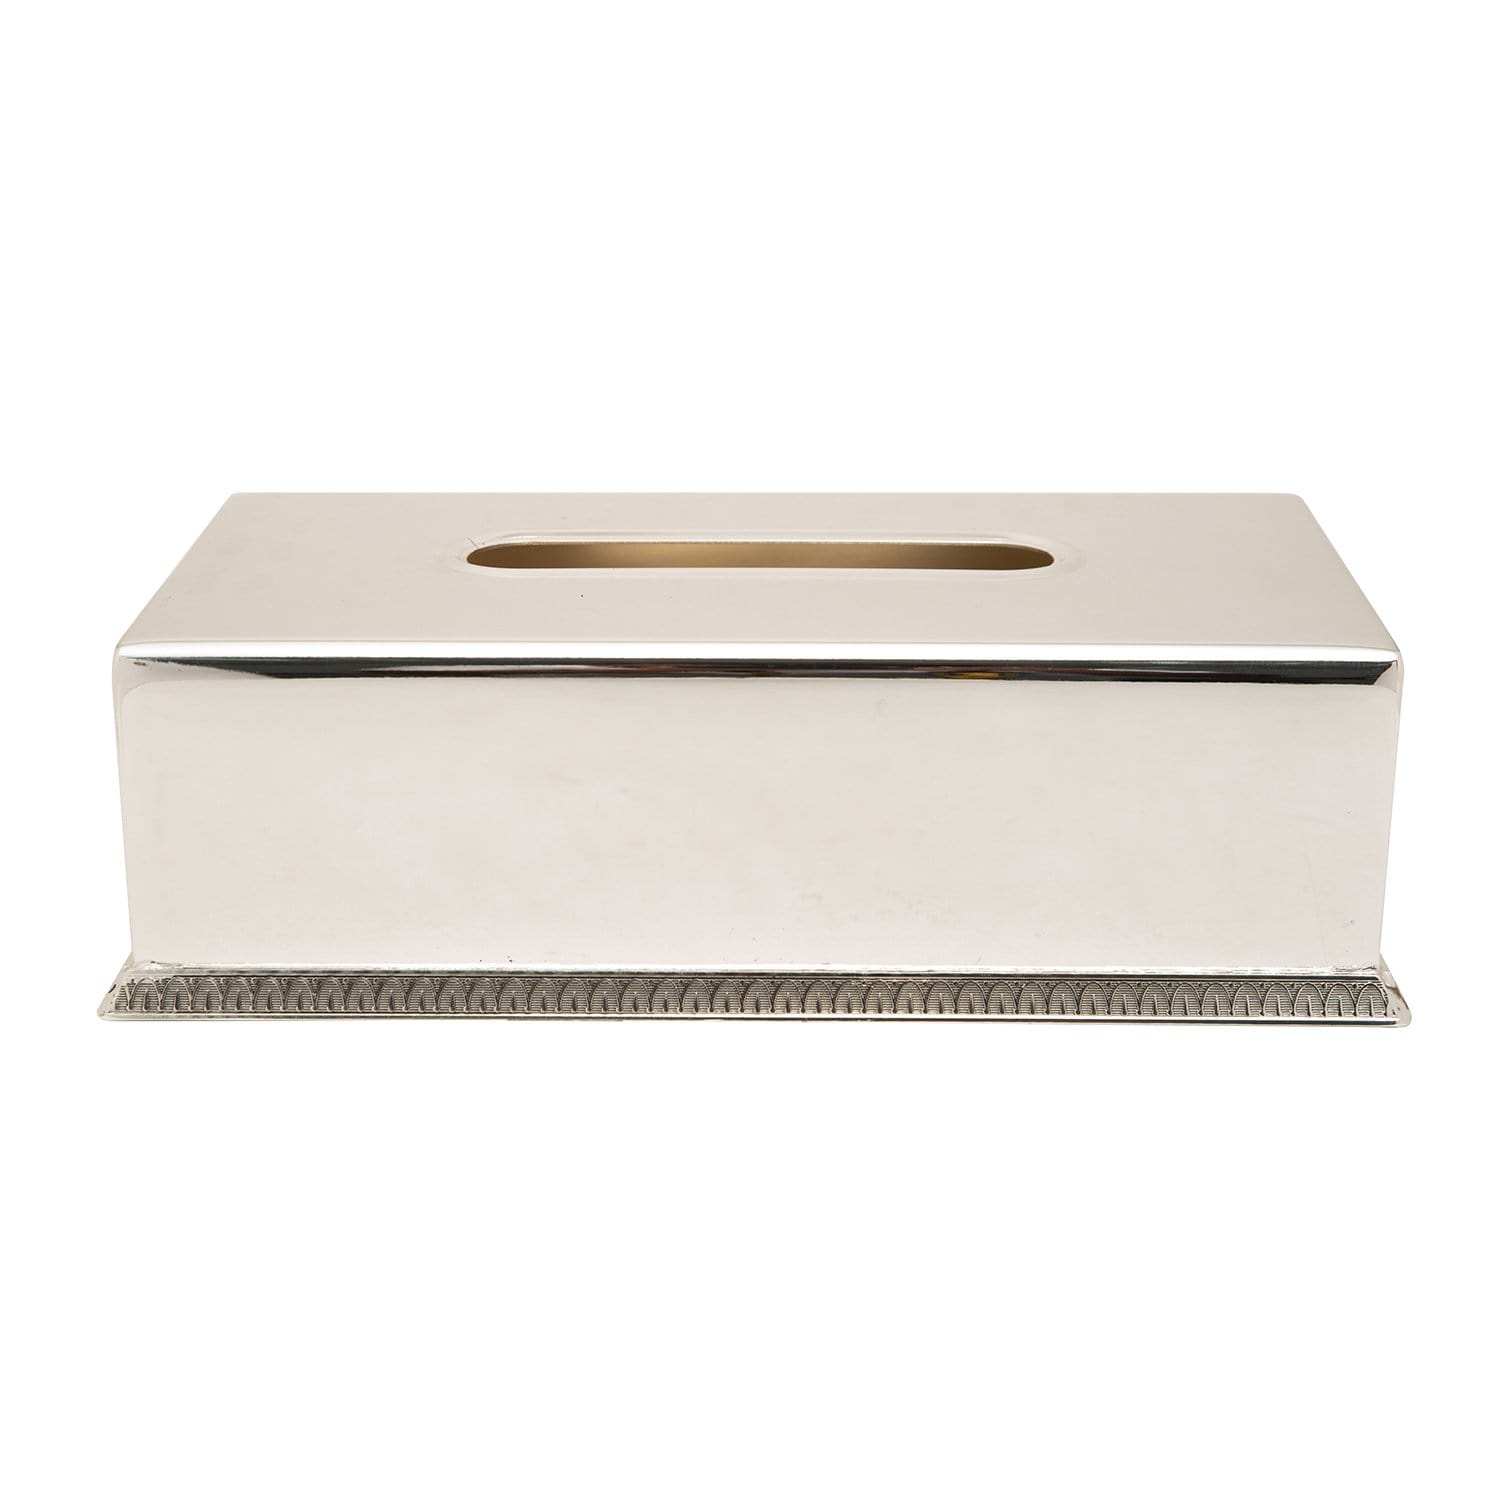 SILVER PLATED TISSUE BOX